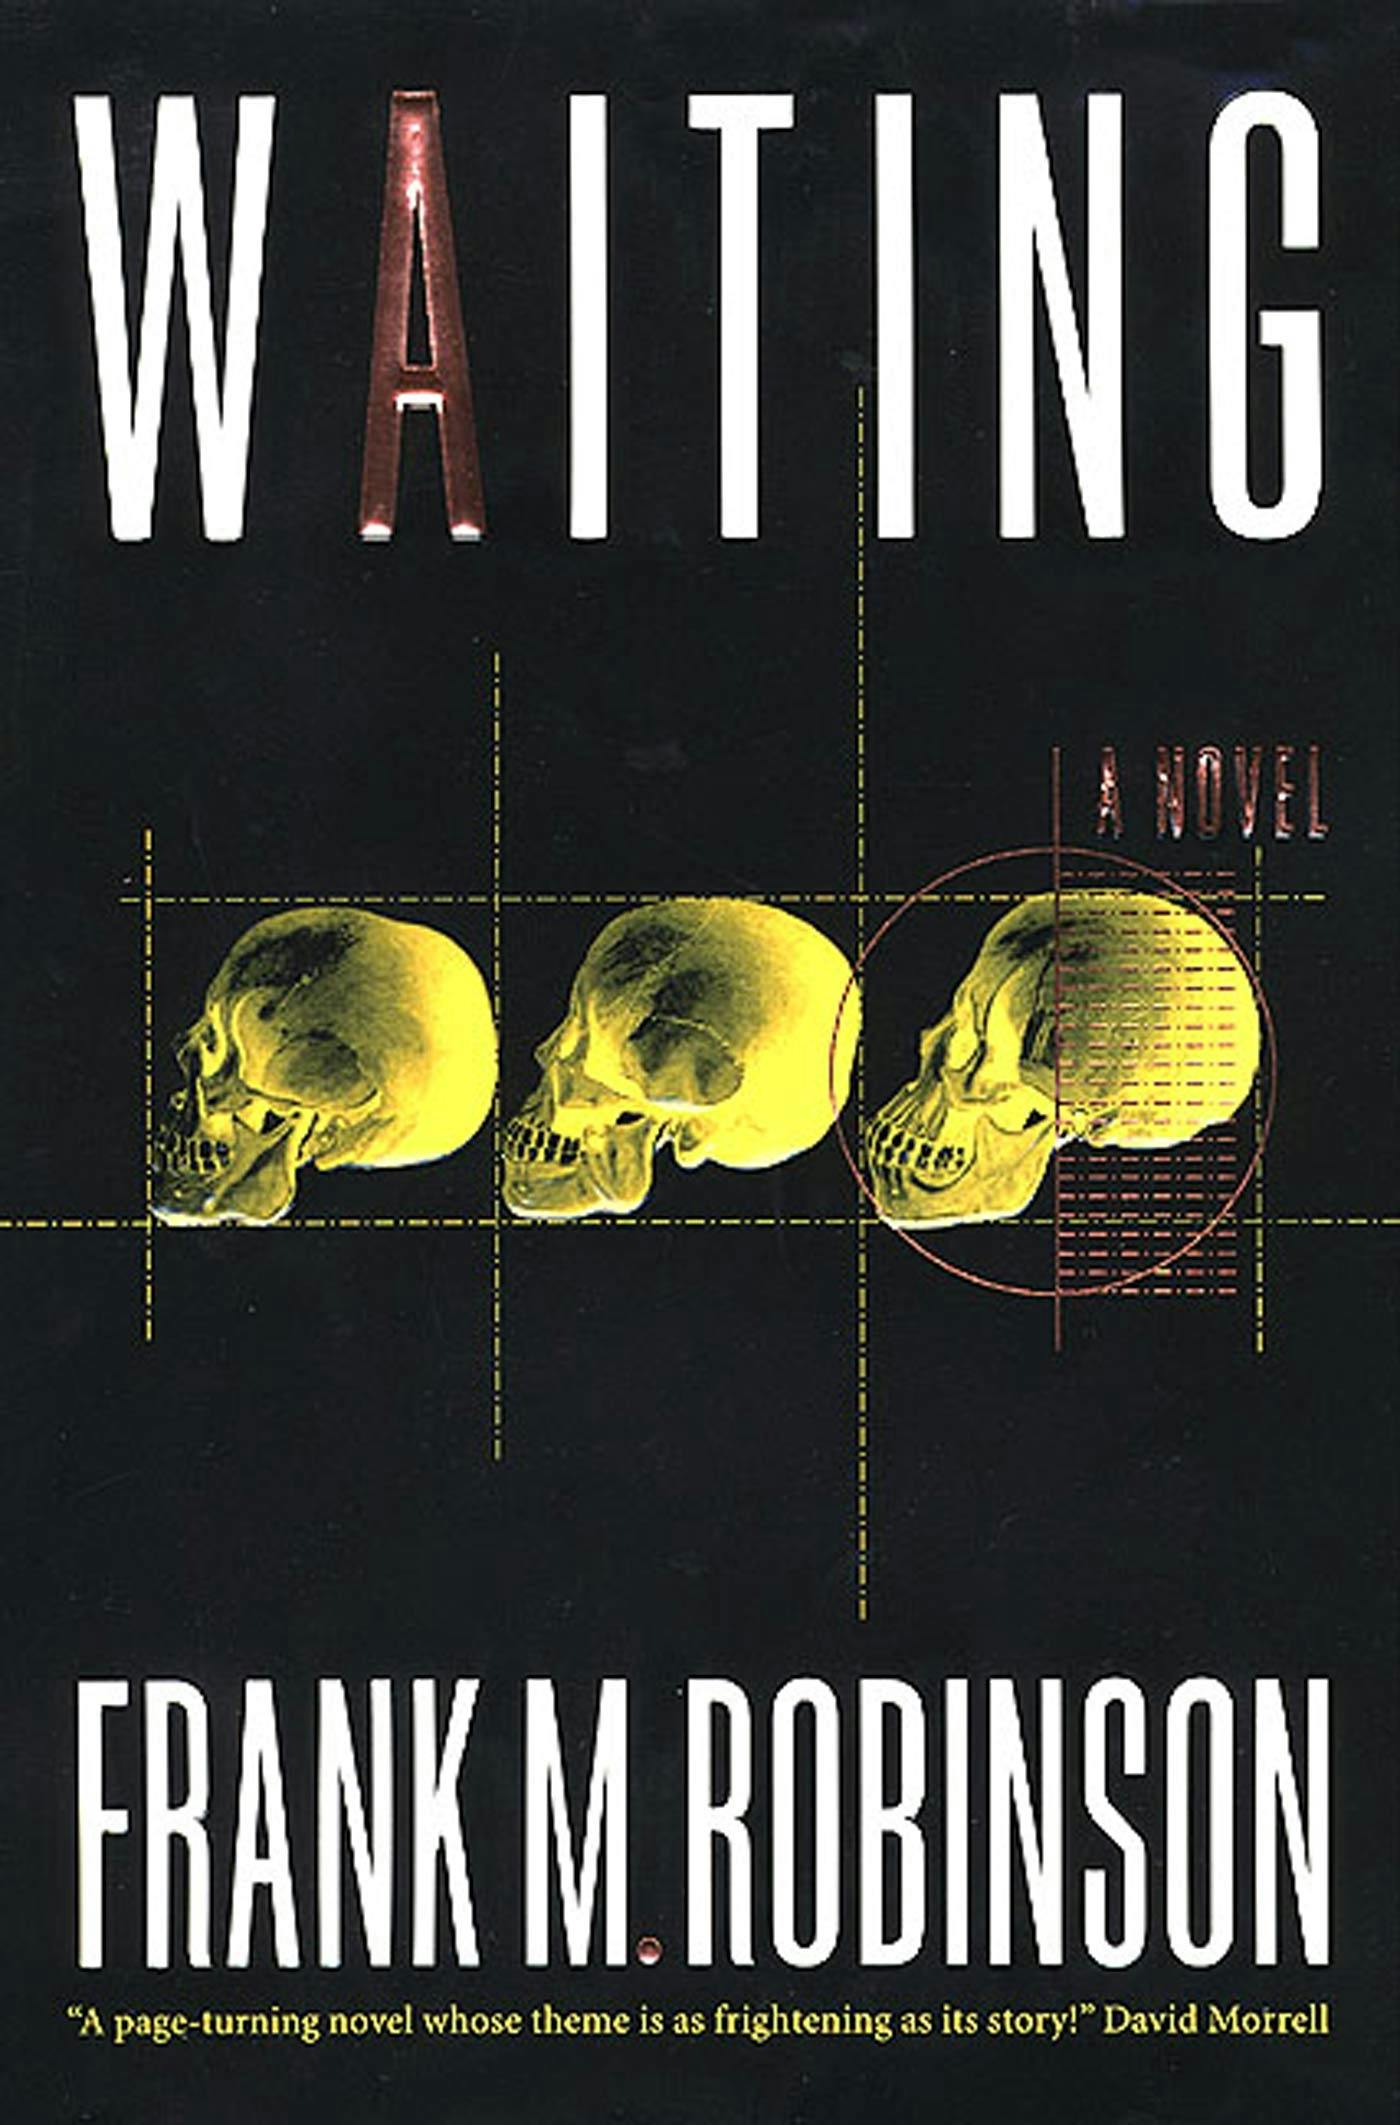 Cover for the book titled as: Waiting